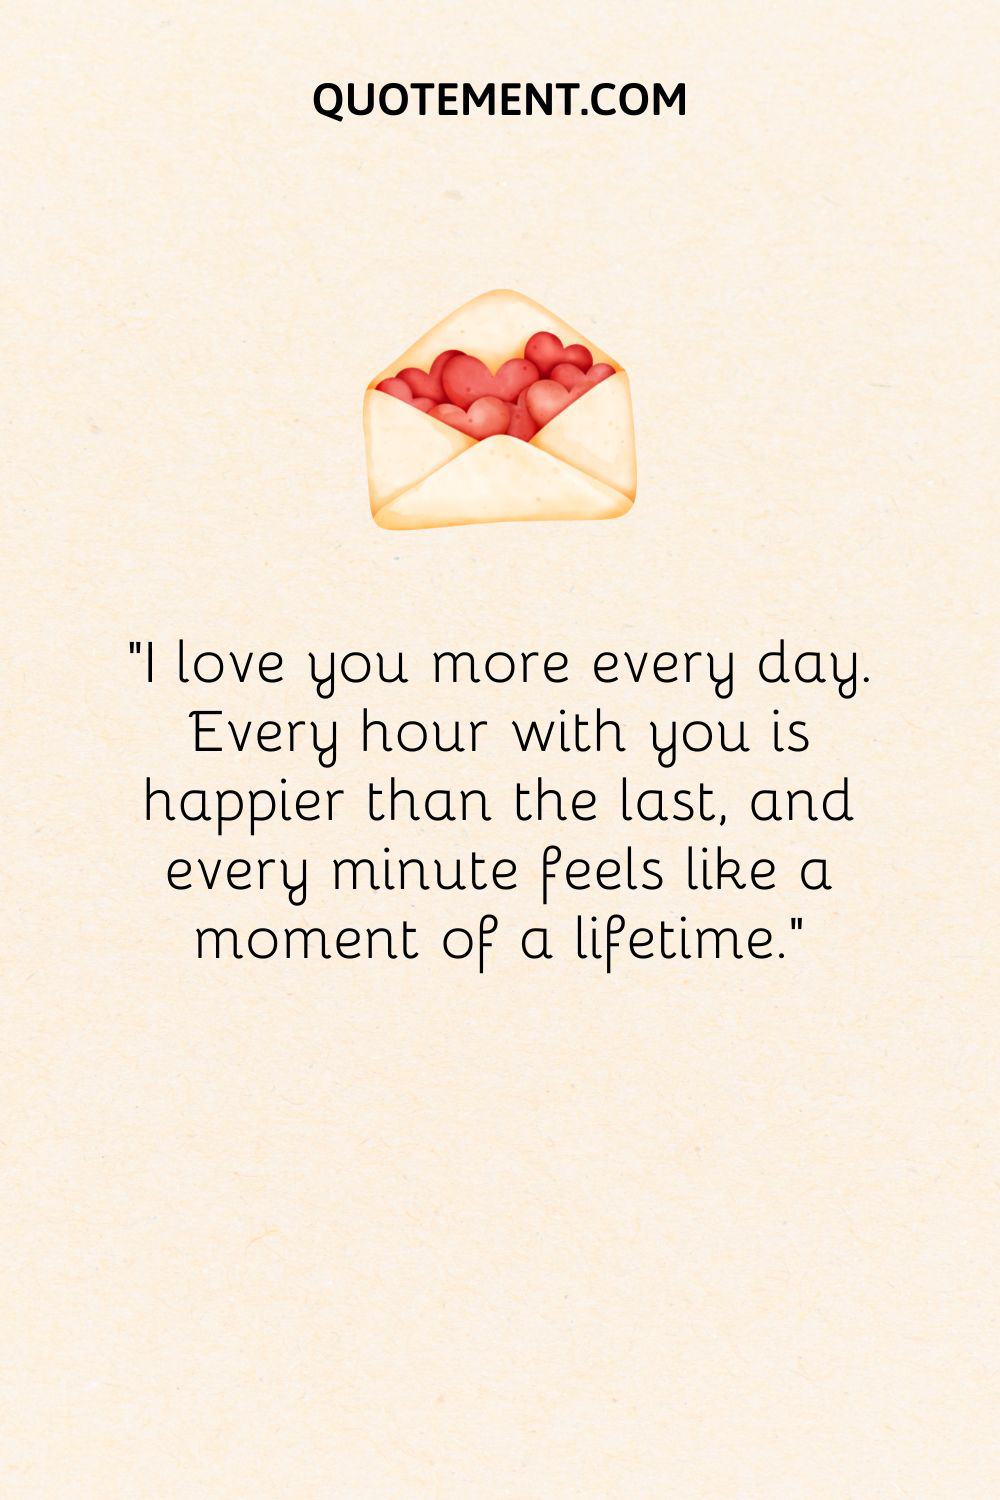 “I love you more every day. Every hour with you is happier than the last, and every minute feels like a moment of a lifetime.”